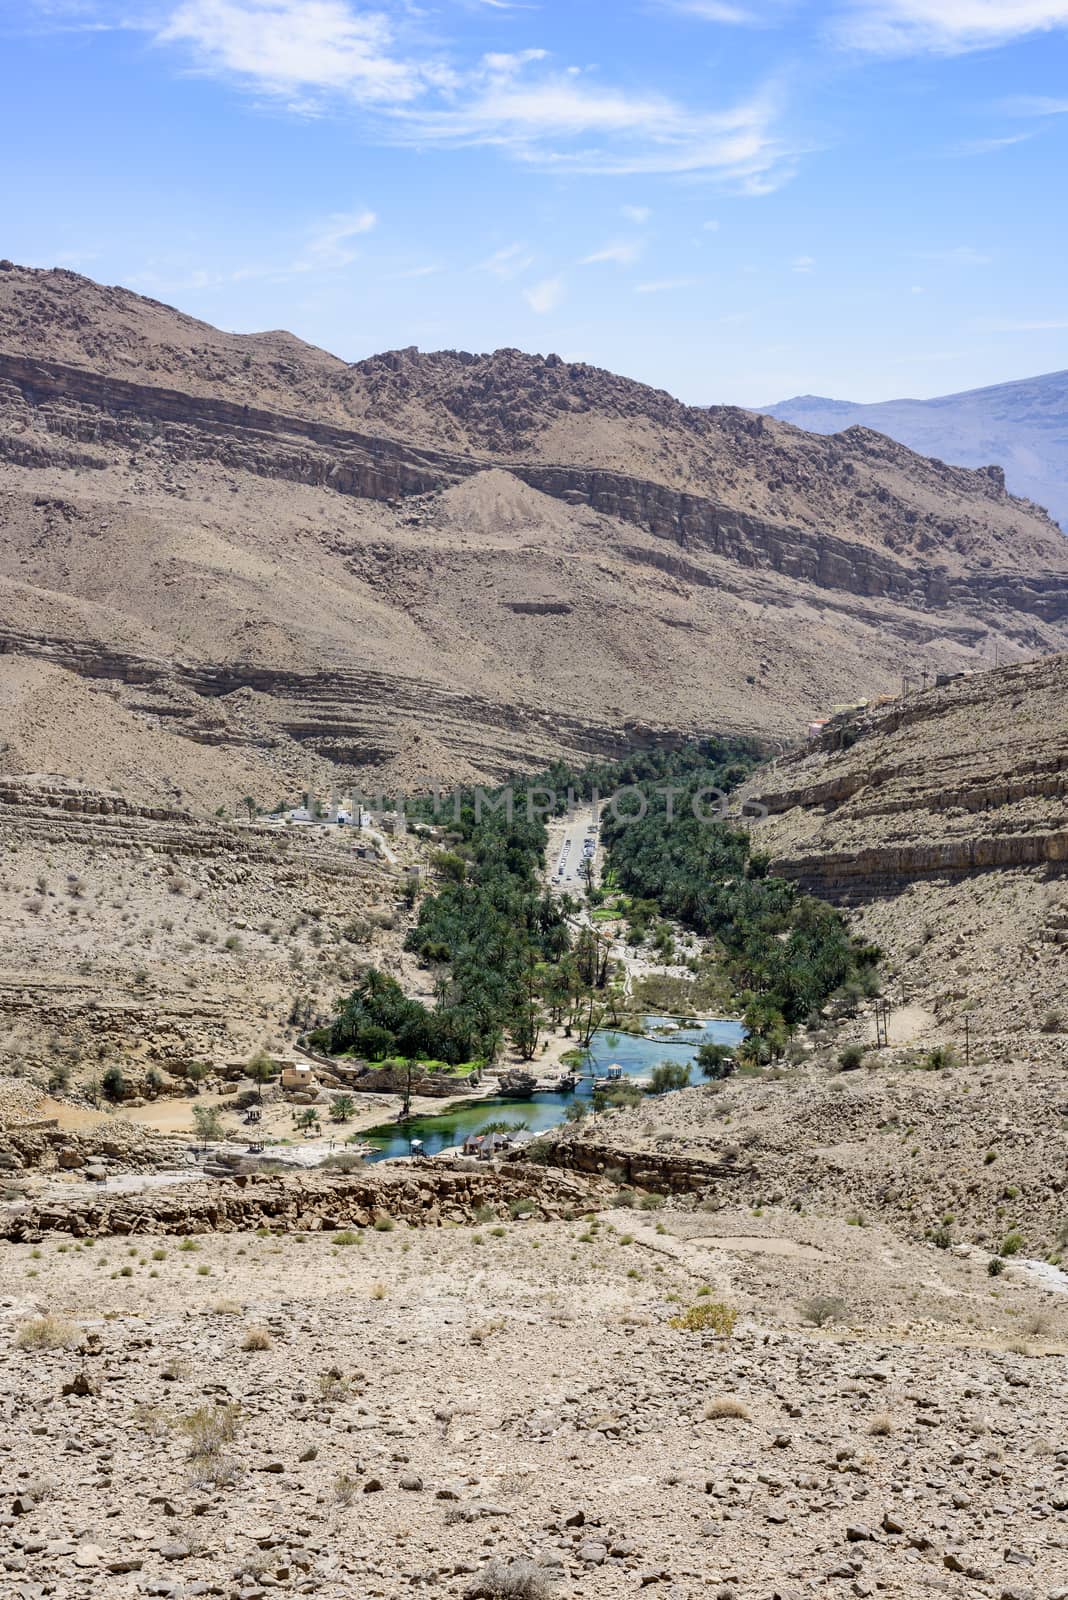 Top view of Wadi Bani Khalid, Sultanate of Oman. We can see the main pool and many tourists going and coming in/from the canyon. This is one of the most visited wadi in Oman with easy access. Many travel agencies are stopping by. It is a main destination.